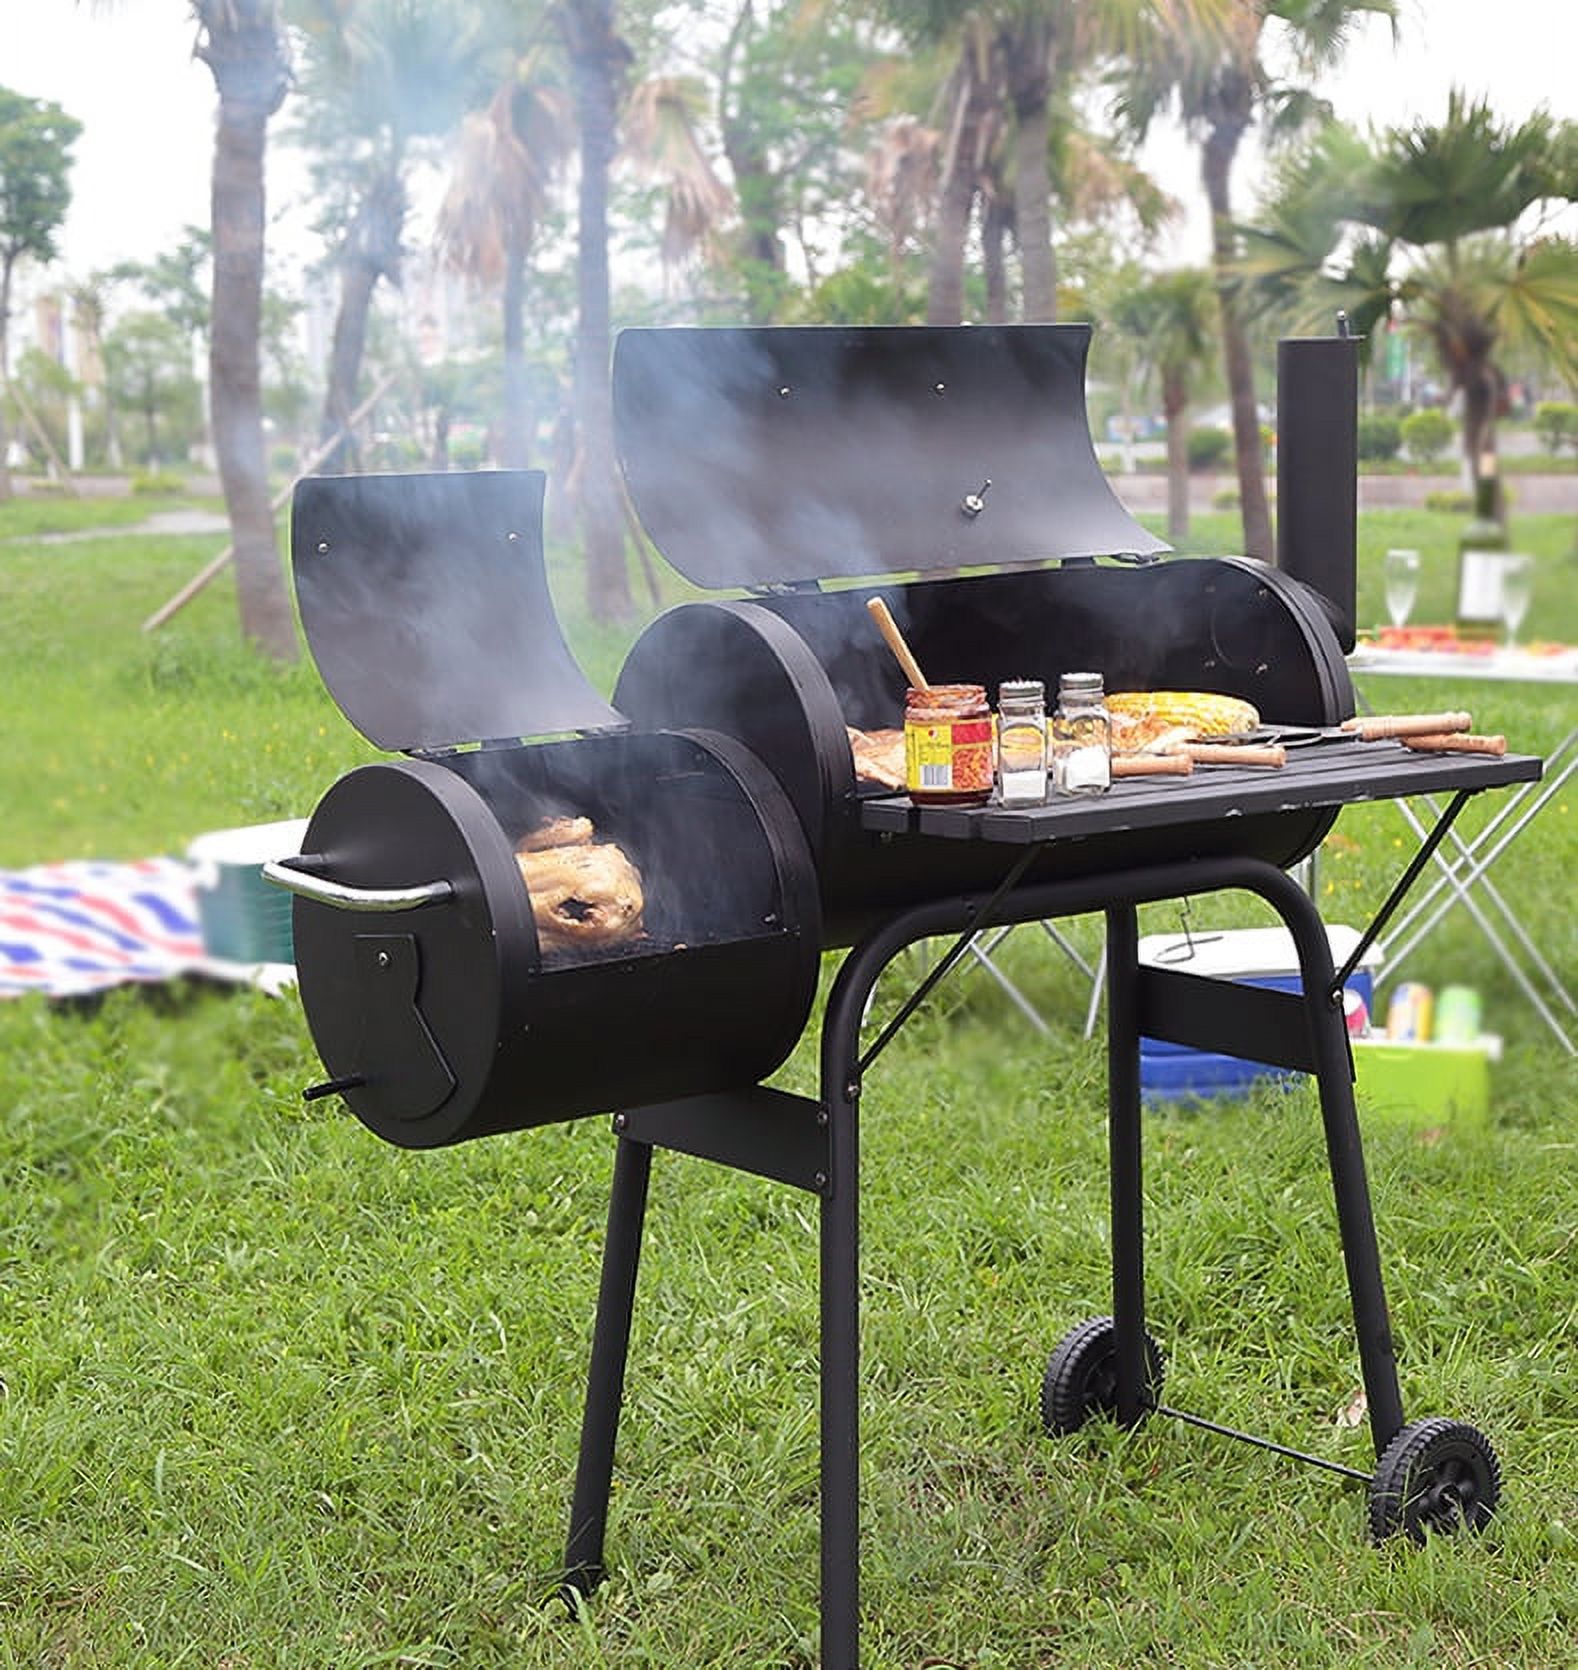 INTBUYING Outdoor BBQ Grill Camping Garden Charcoal Barbecue Stove Grills - image 5 of 8